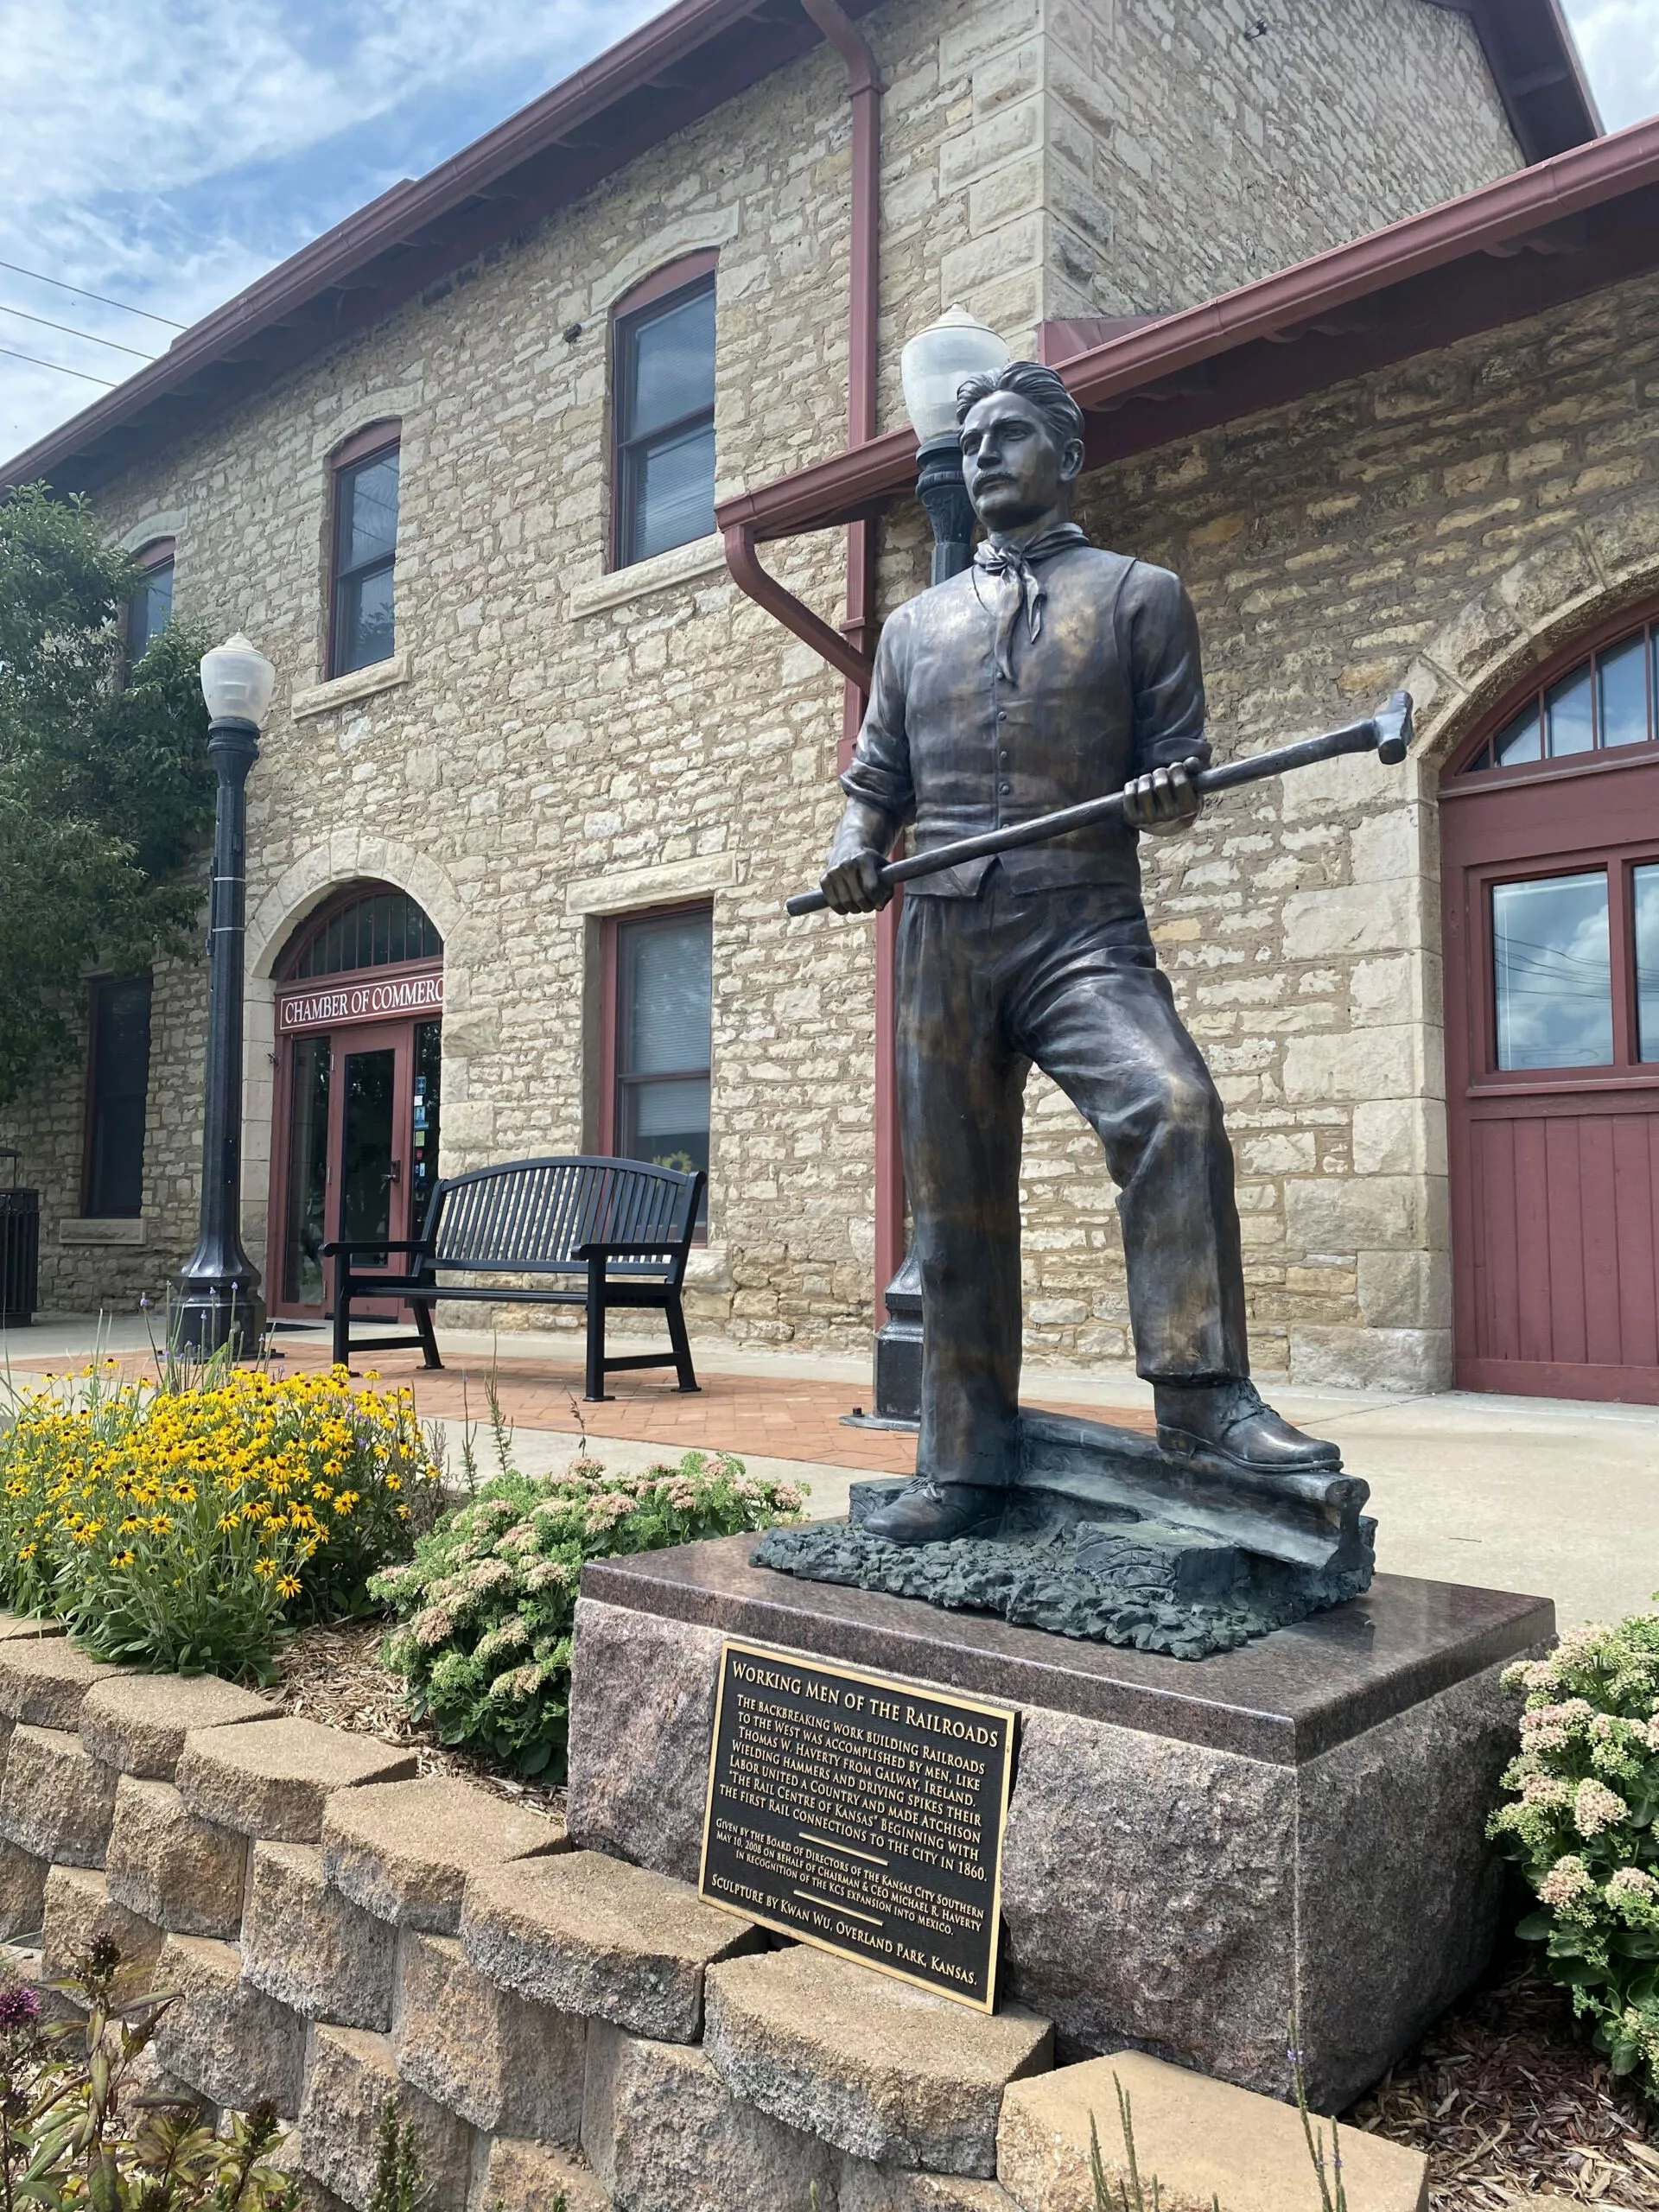 Statue of railroad worker in front of the Atchison County Historical Museum in Atchison, Kansas